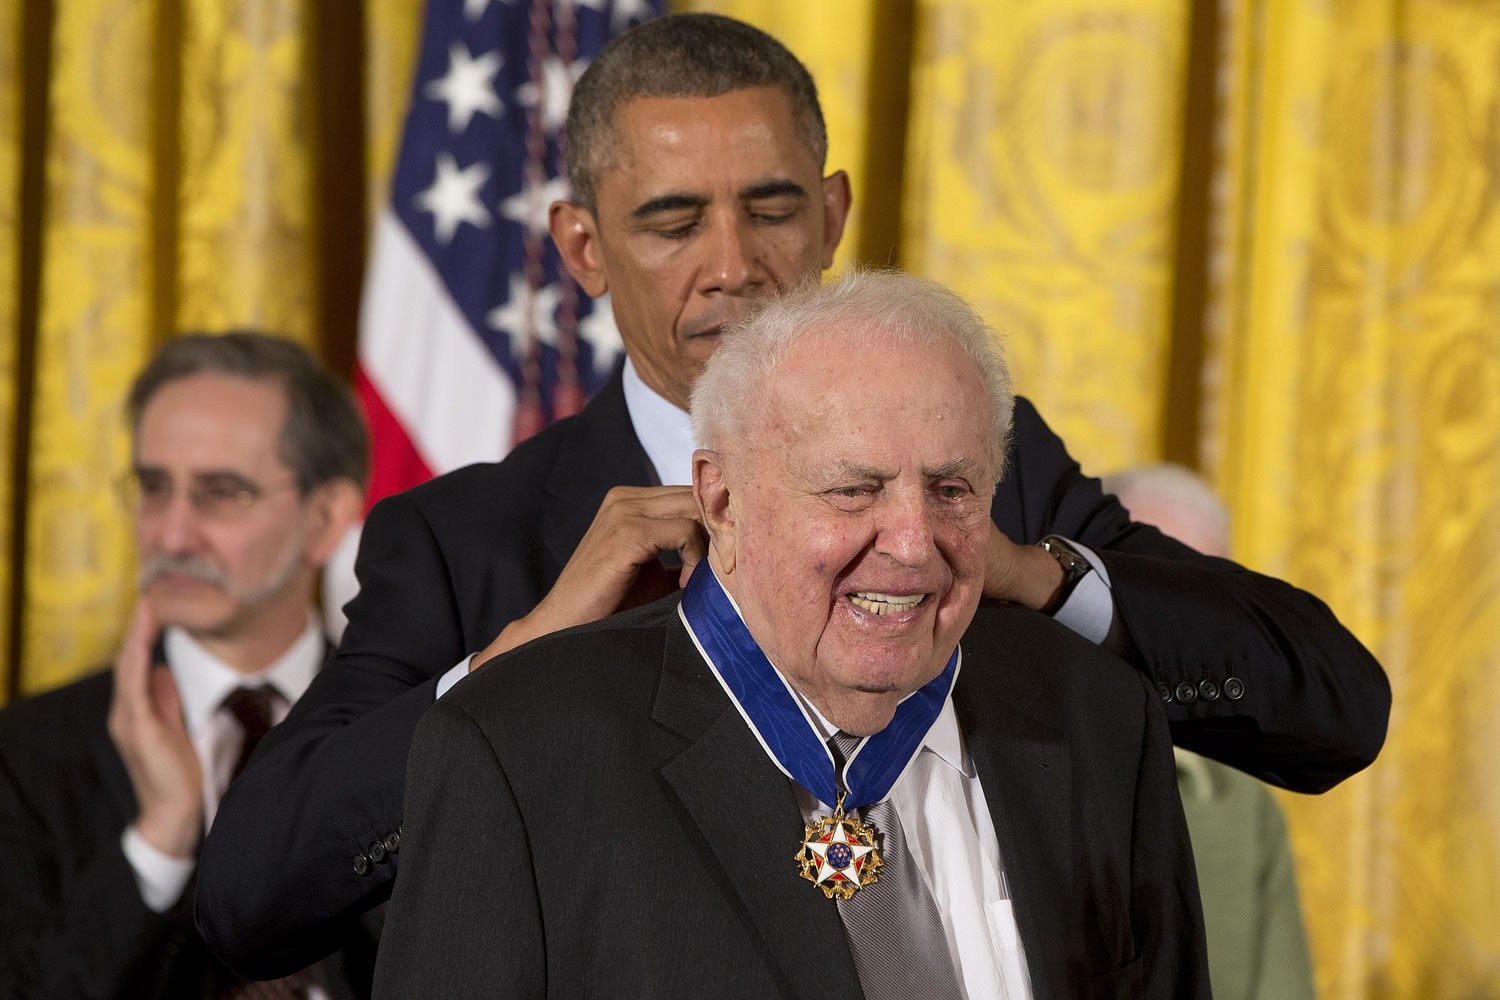 President Barack Obama awards former Illinois Rep. Abner Mikva the Presidential Medal of Freedom, Monday, Nov. 24, 2014, during a ceremony in the East Room of the White House in Washington.